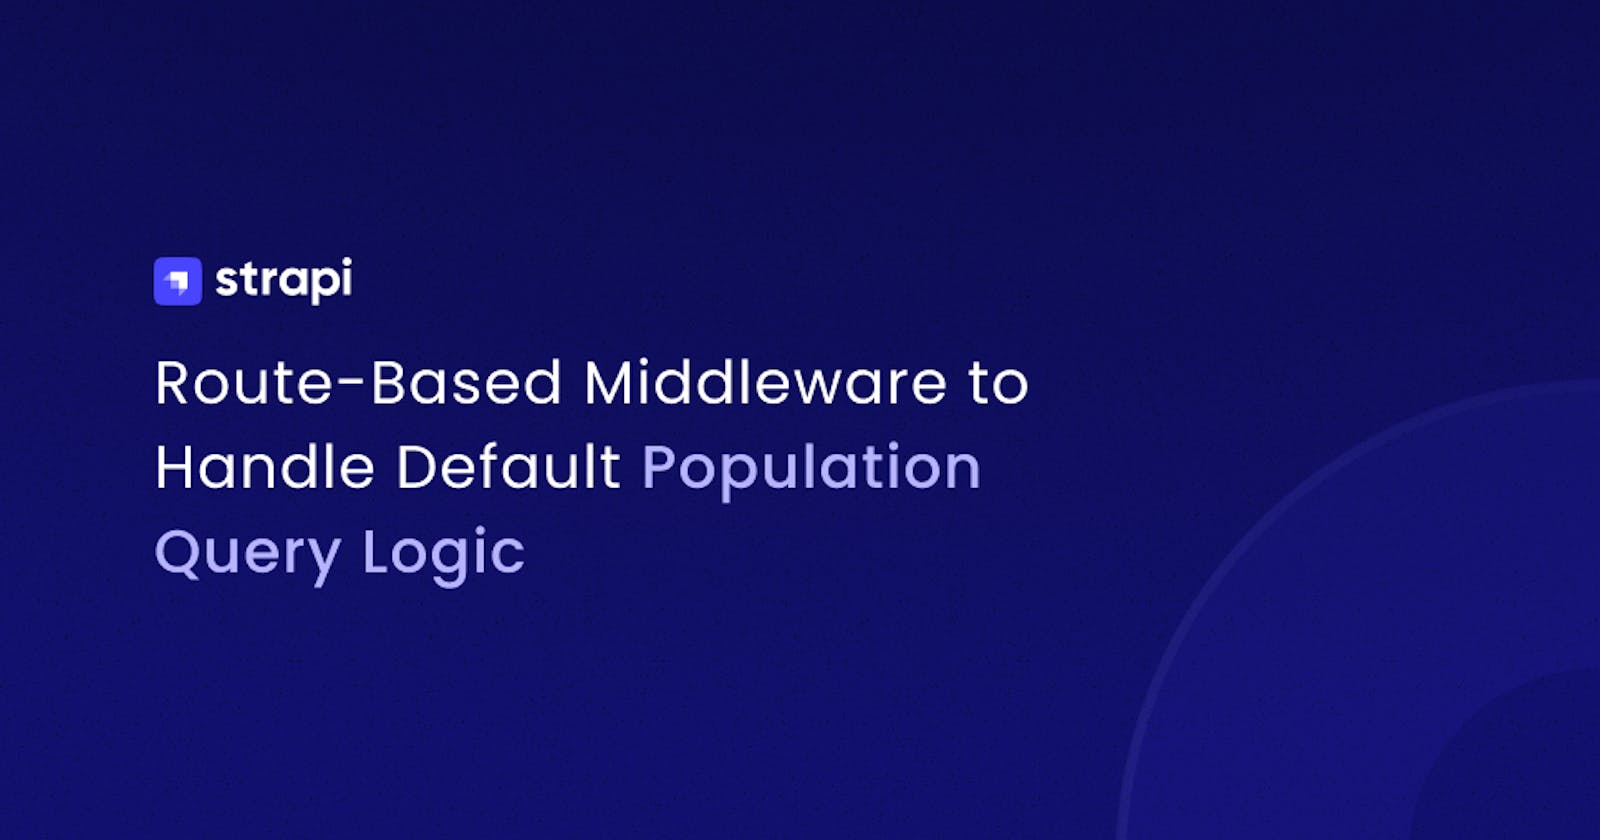 Route-Based Middleware to Handle Default Population Query Logic